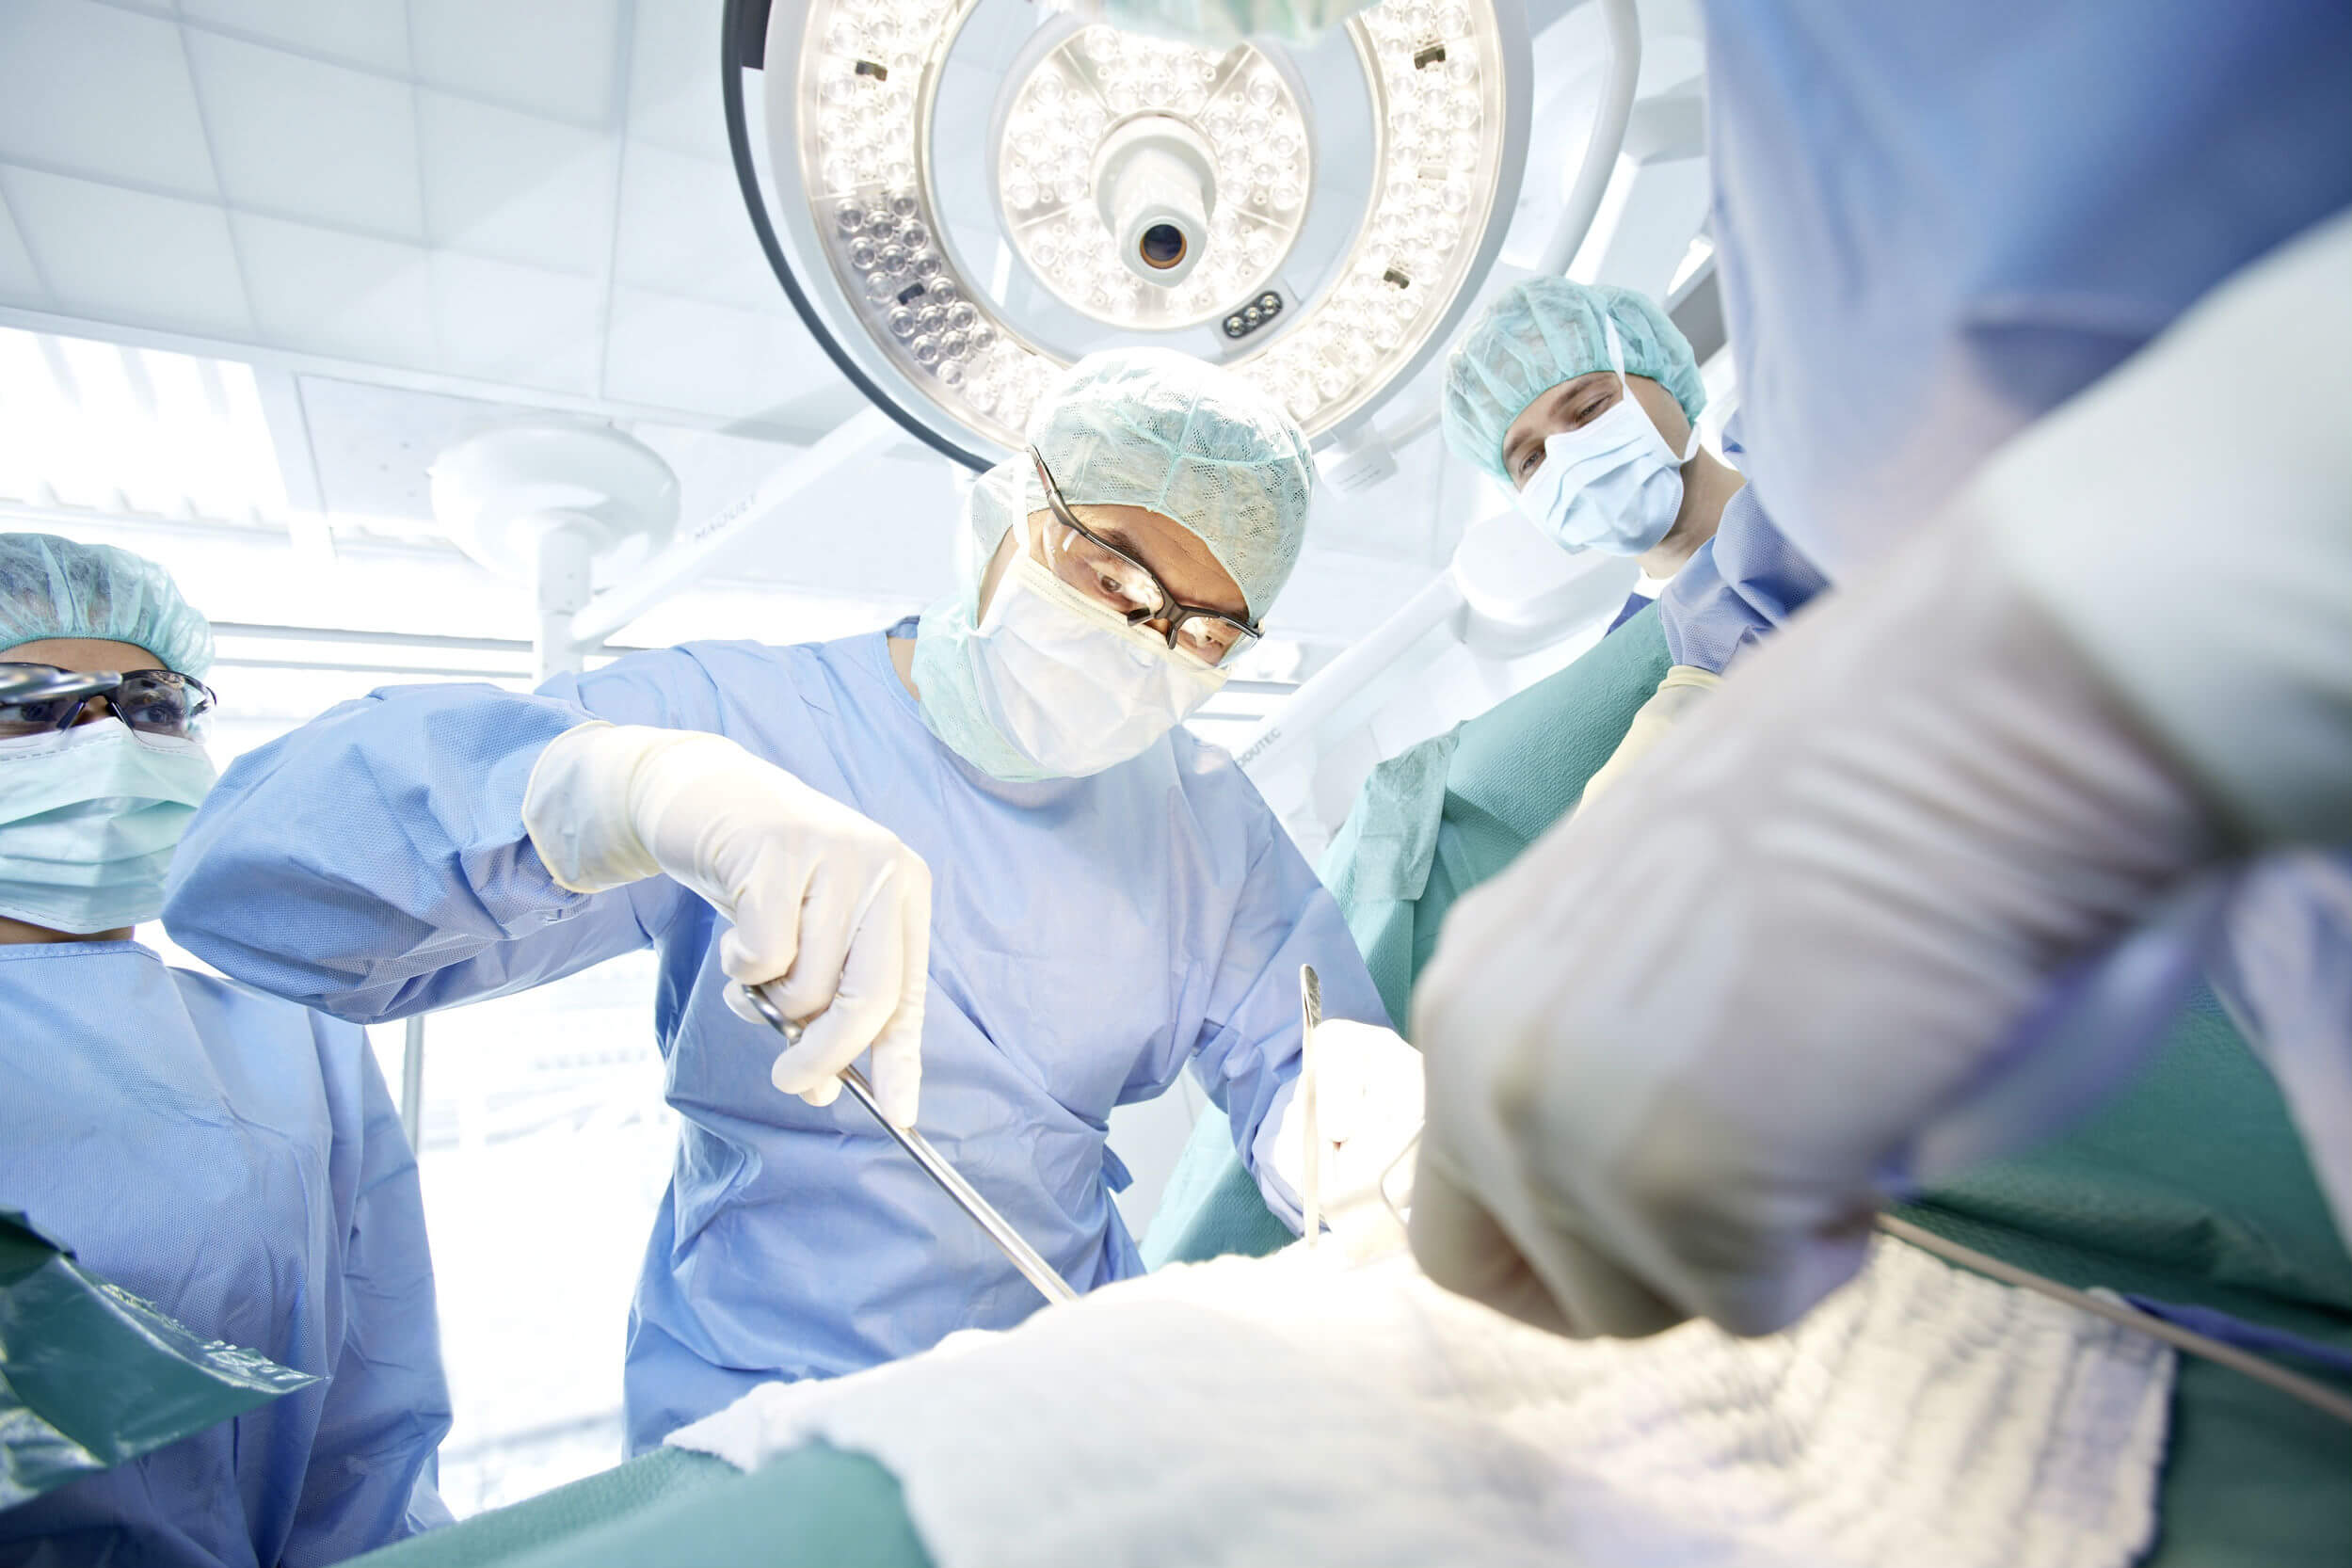 With the new cancer treatment, surgeons remove the organ, clean it, and put it back in place.